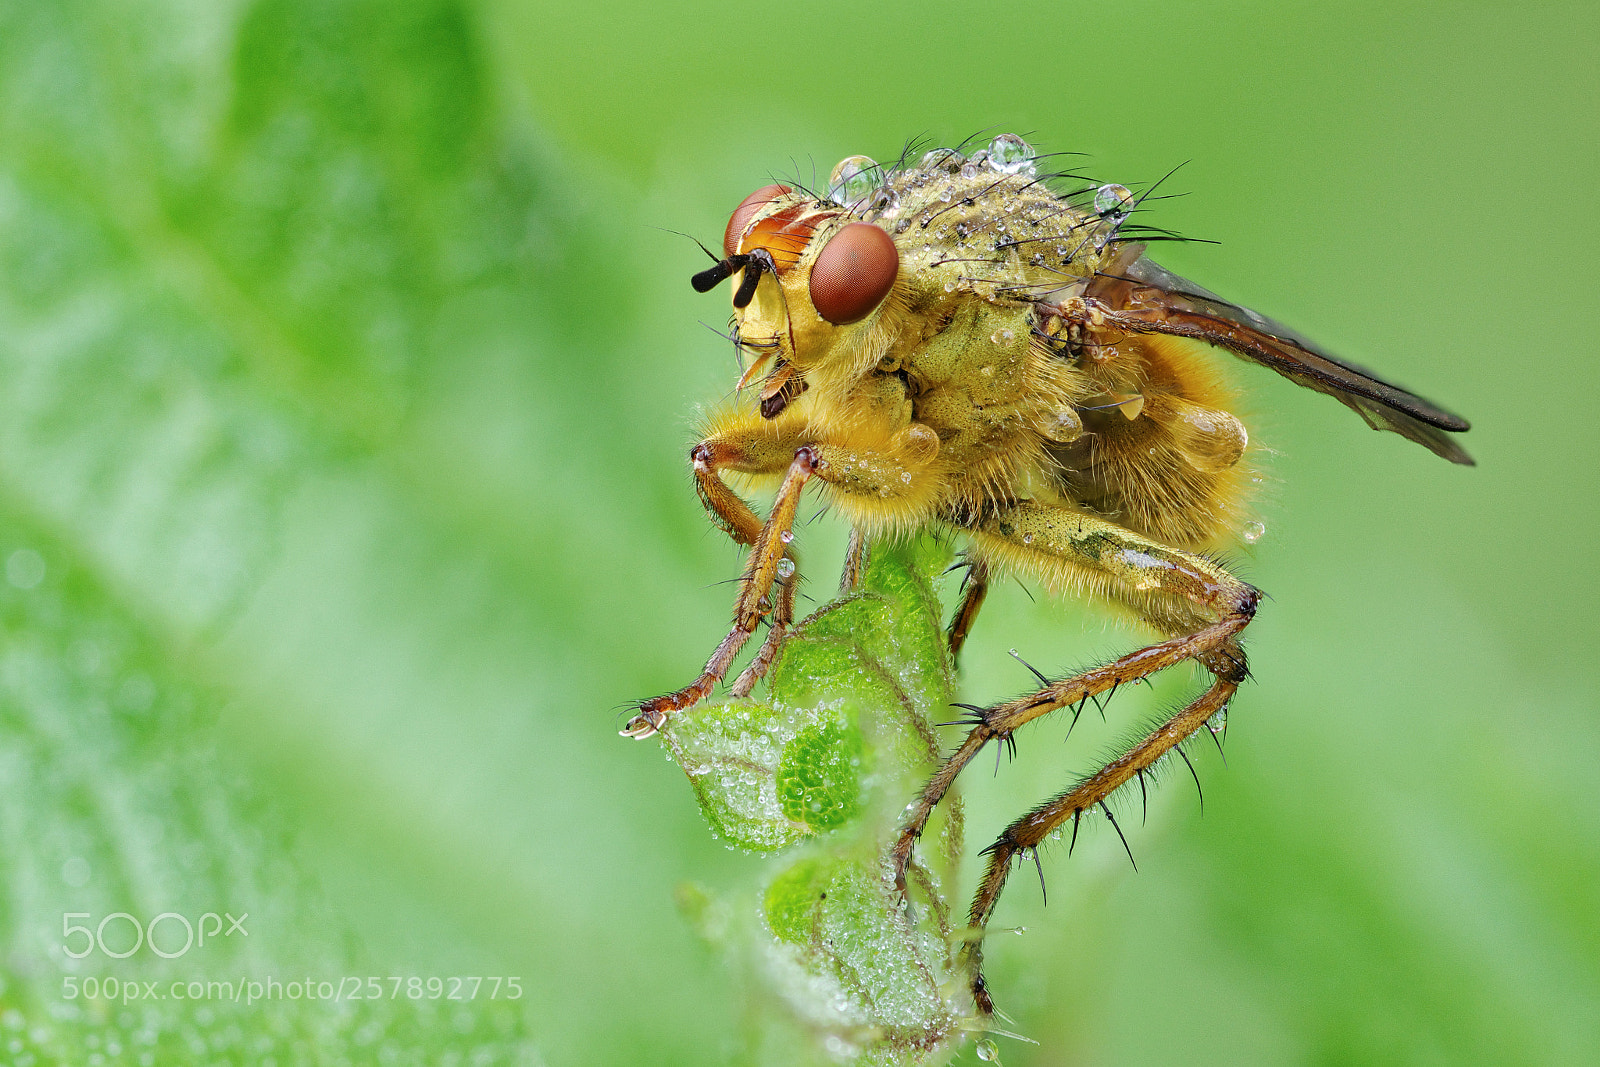 Pentax K-3 sample photo. Yellow dung fly photography